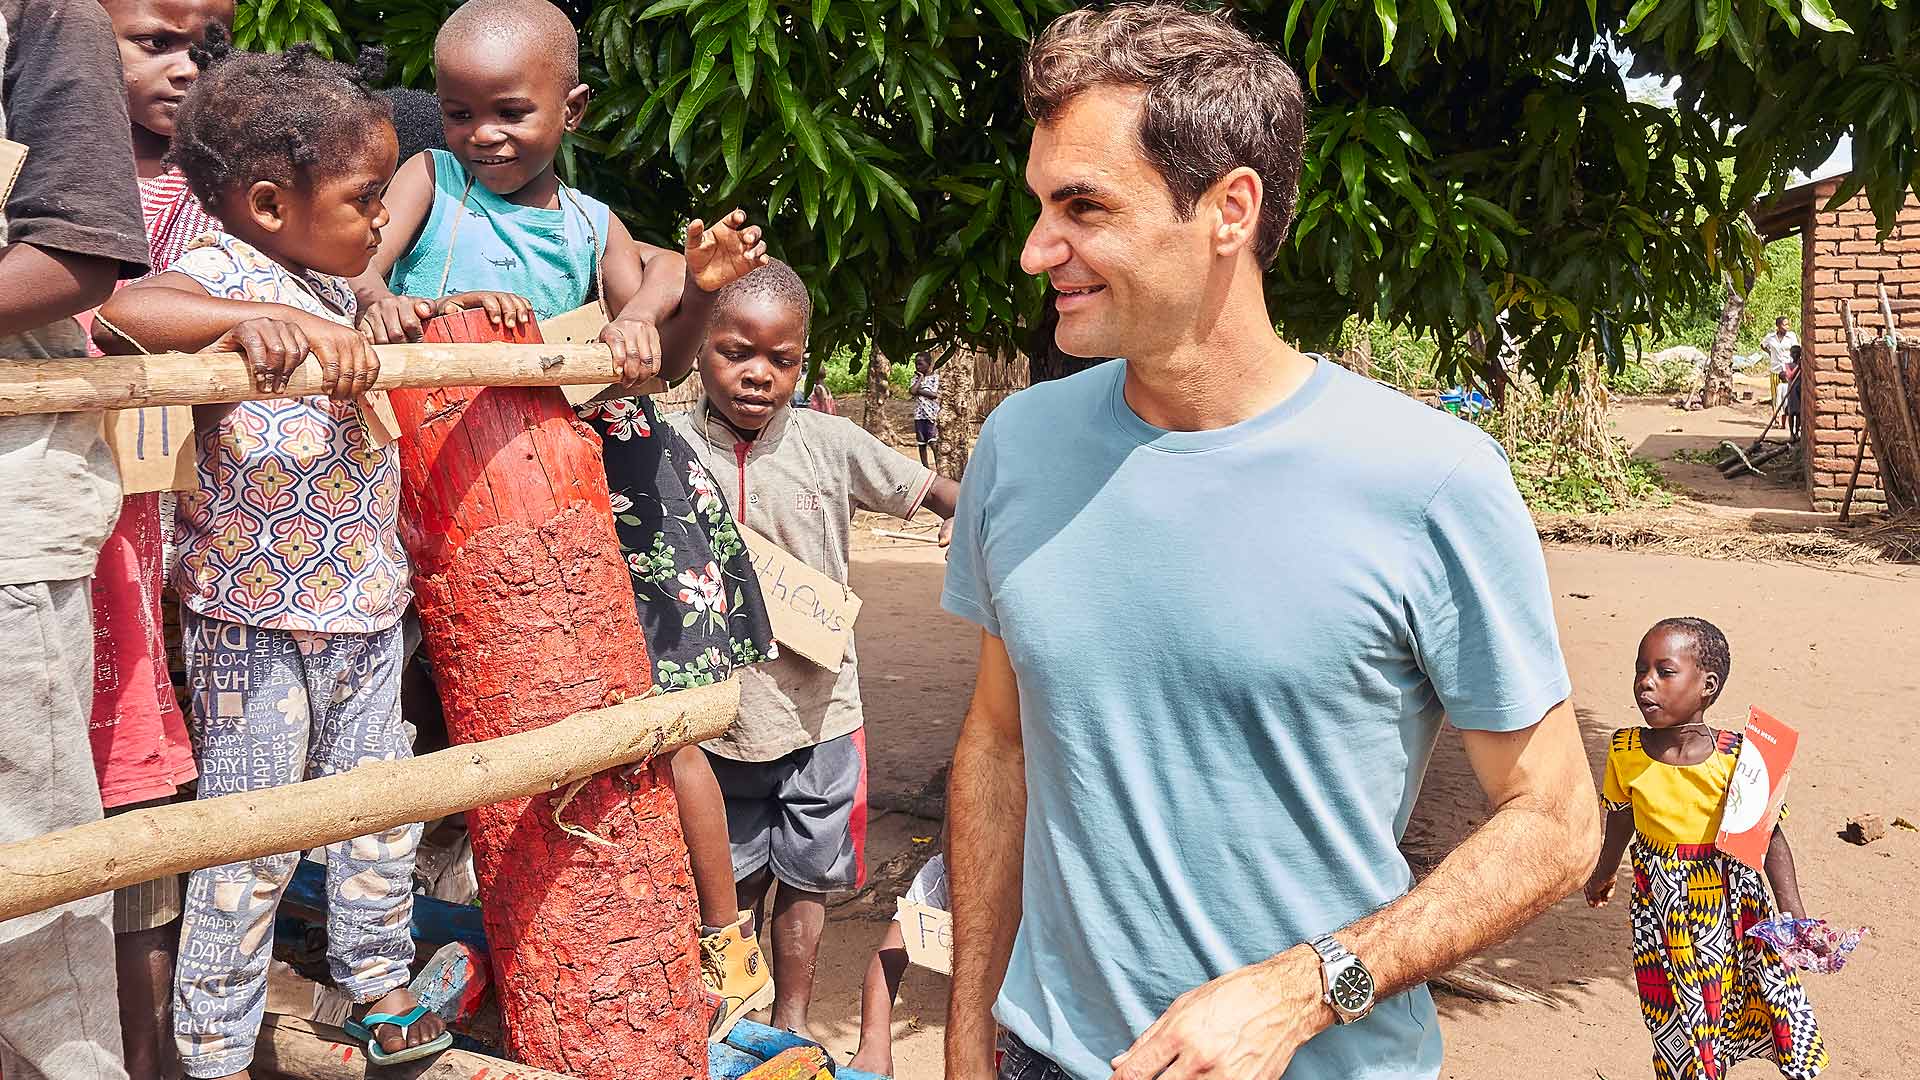 Roger Federer Visits Malawi: ‘Access To Top quality Early Education Is Crucial’ | ATP Tour